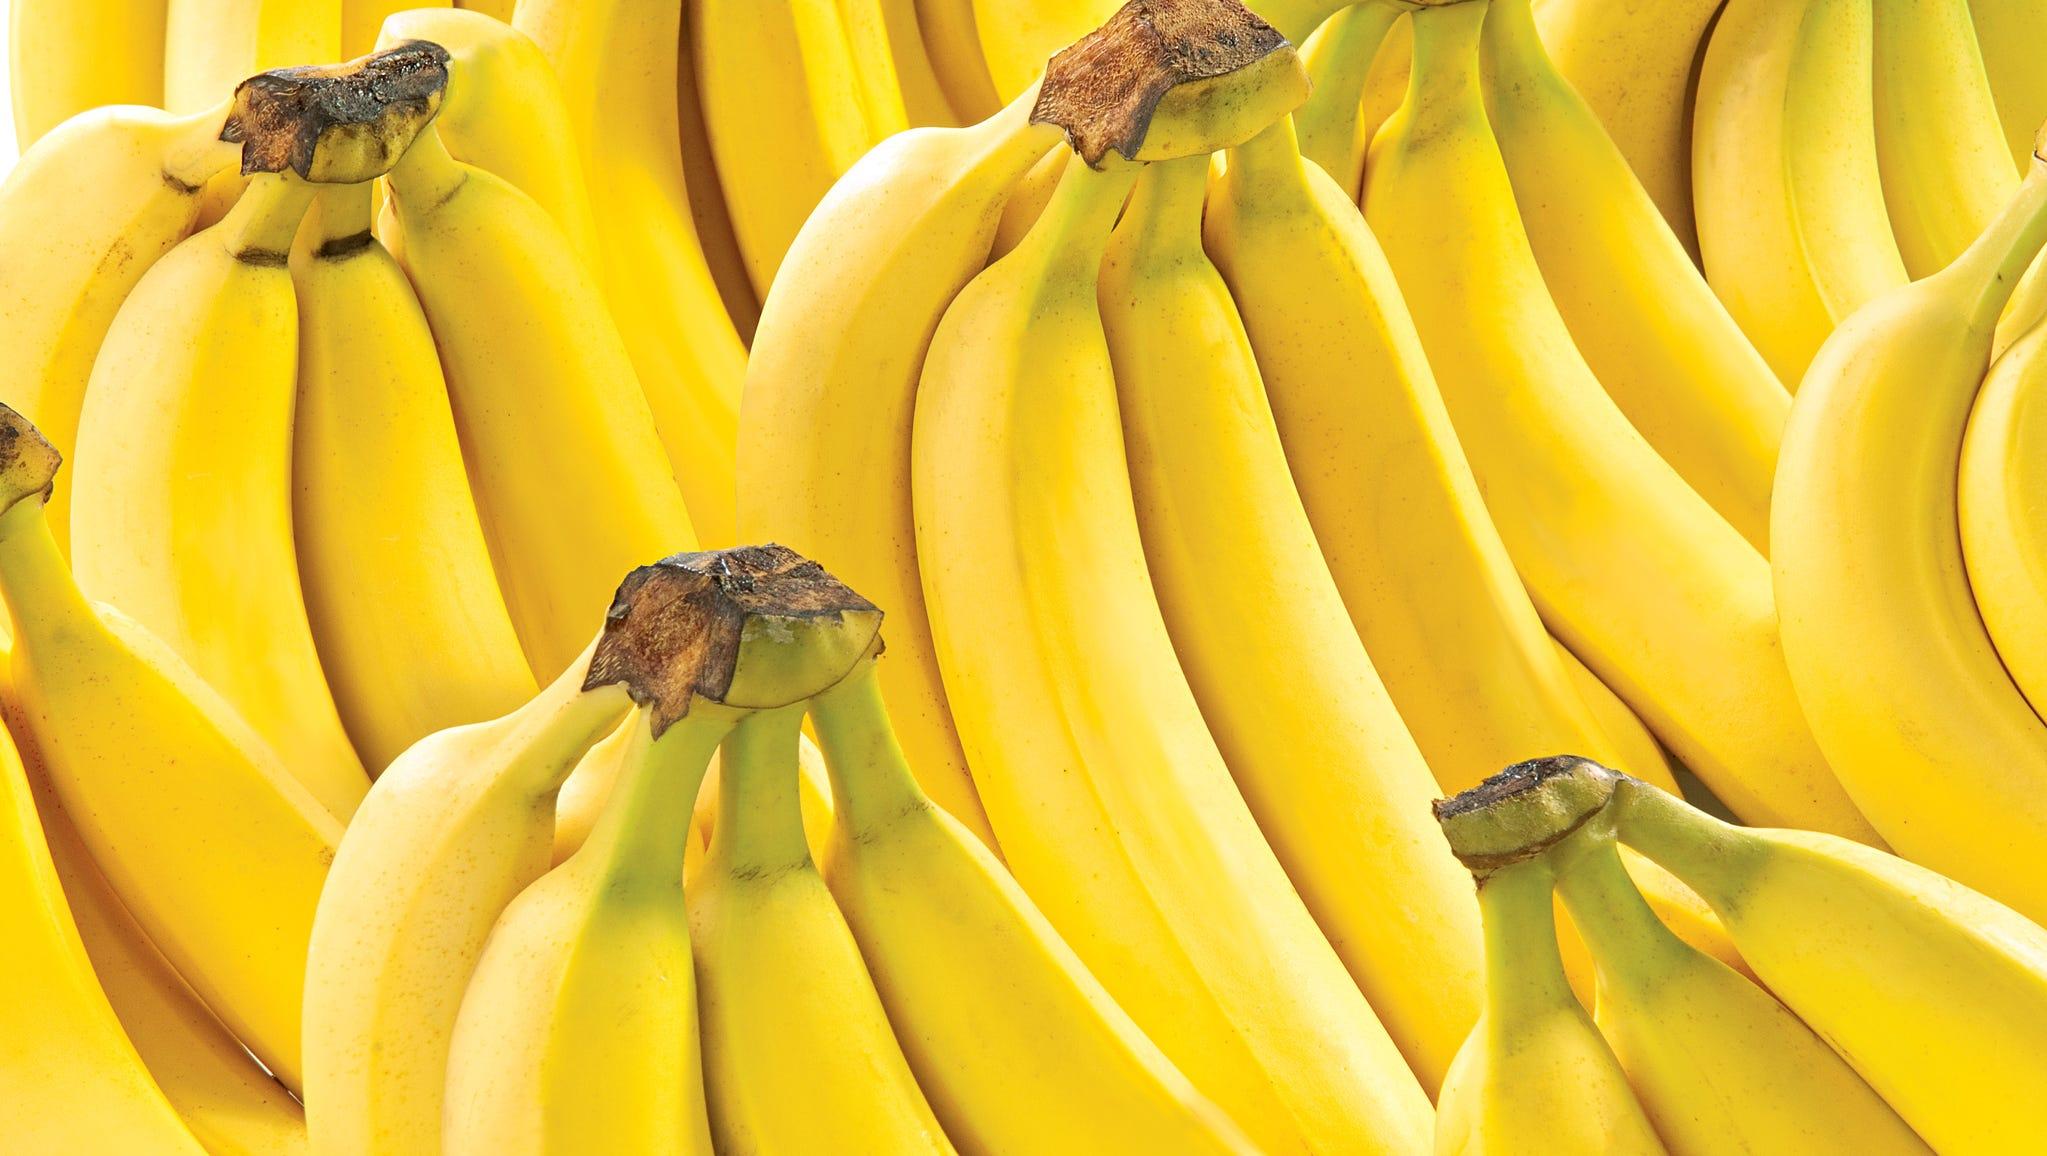 Bananas ripen naturally and release ethylene gas, also known as the “fruit-ripening hormone.u0022